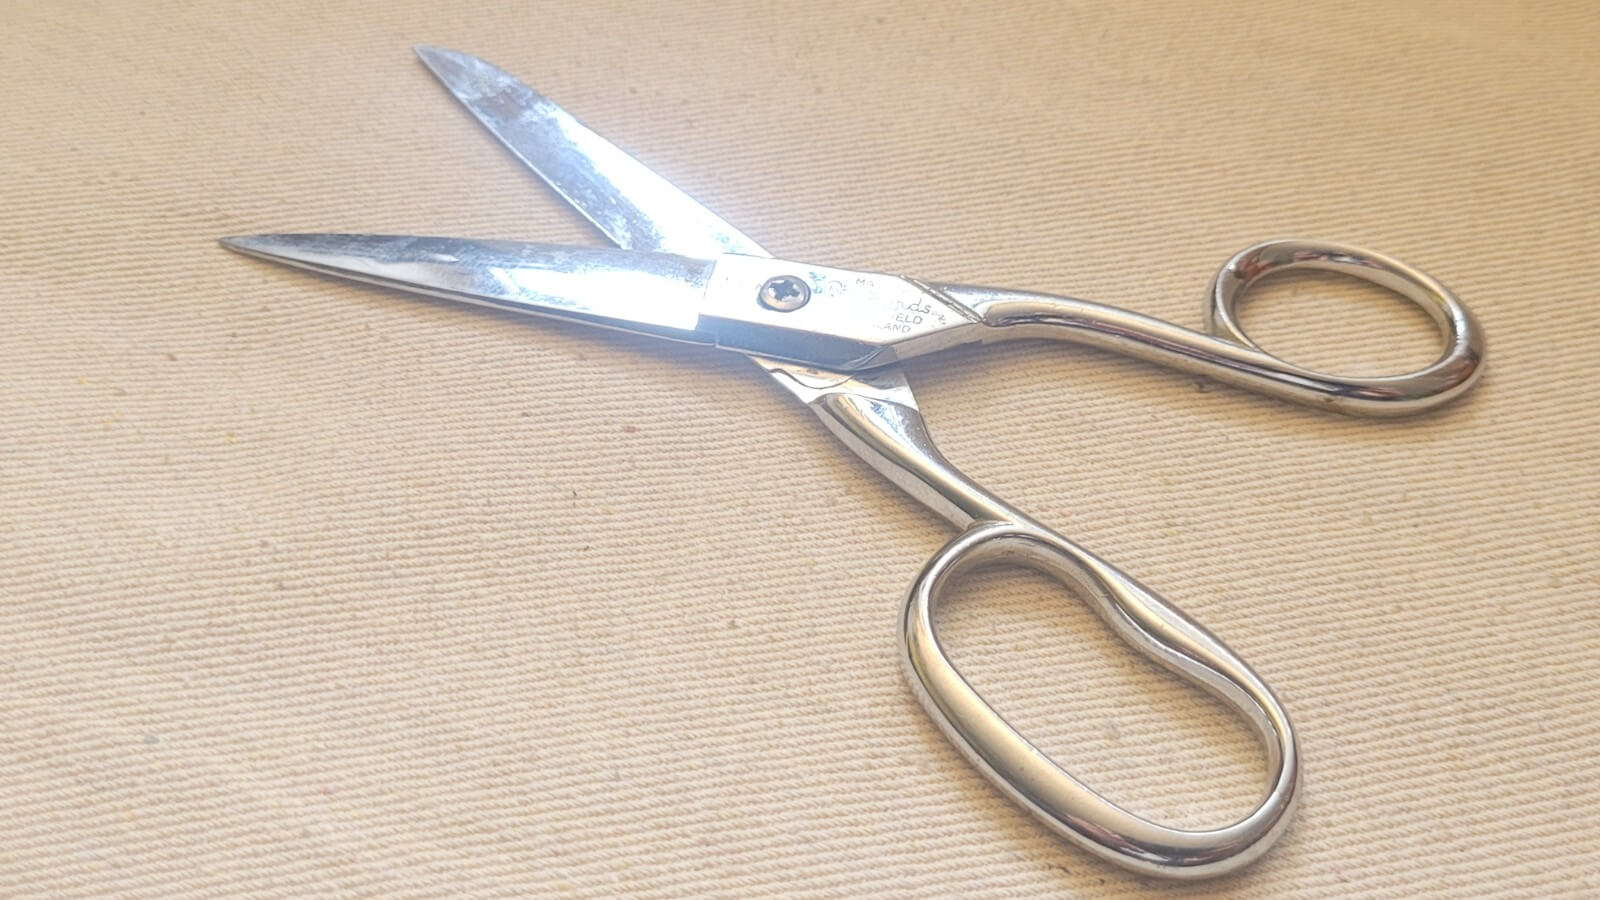 richards-speedway-masterpiece-rustless-chrome-scissors-shears=made-in-shefield-england-sewing-and-upholstery-tools